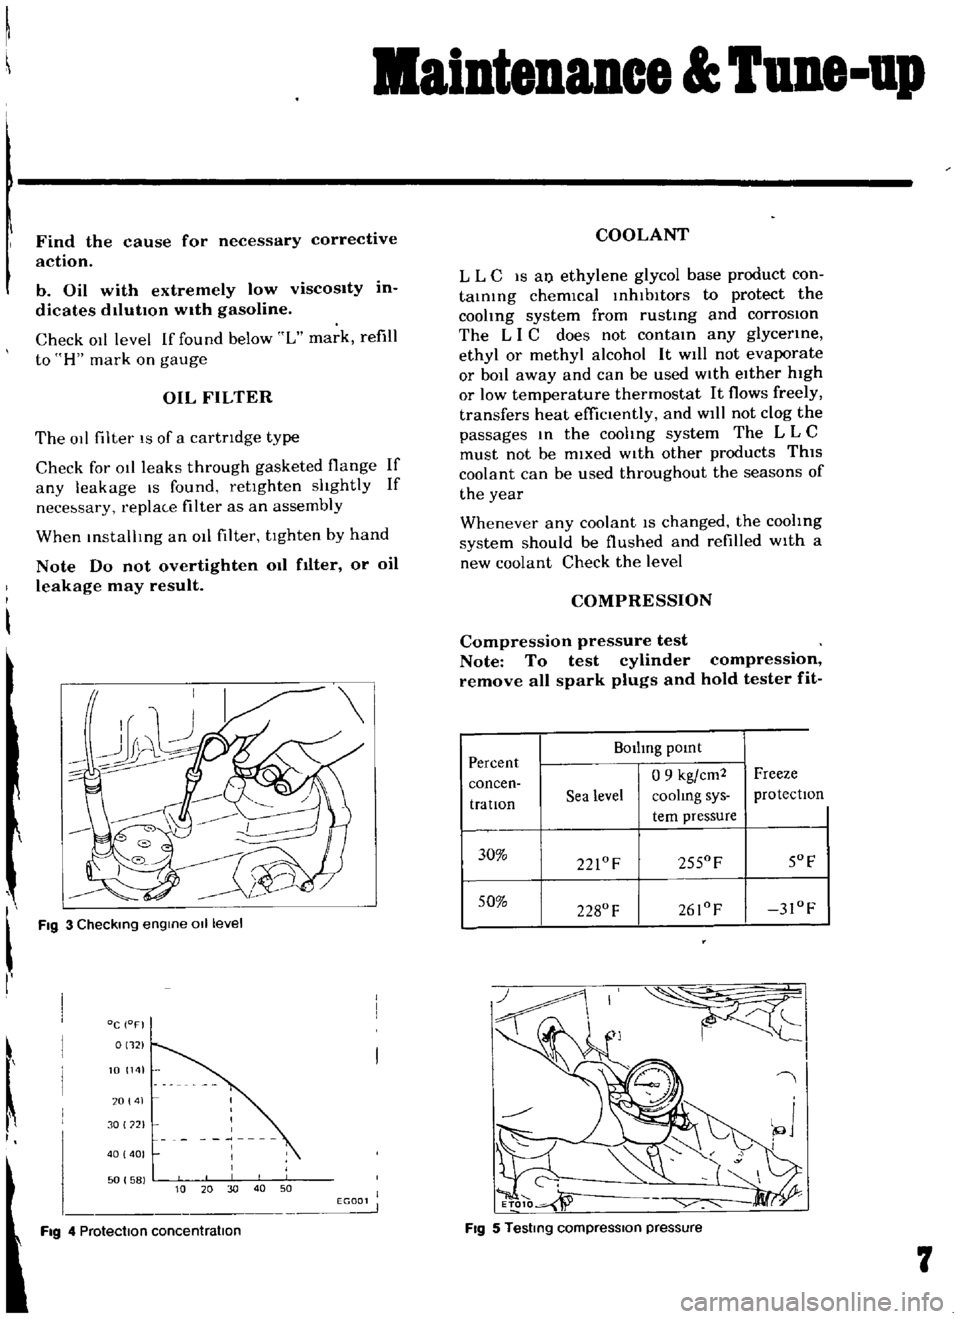 DATSUN B110 1969  Service Repair Manual 
aintenIDce 
une

up

Find 
the 
cause 
for

necessary 
corrective

action

b 
Oil 
with

extremely 
low

viscosity 
in

dicates 
dllutton 
with

gasoline

Check 
011 
level 
If 
found 
below 
L 
mark